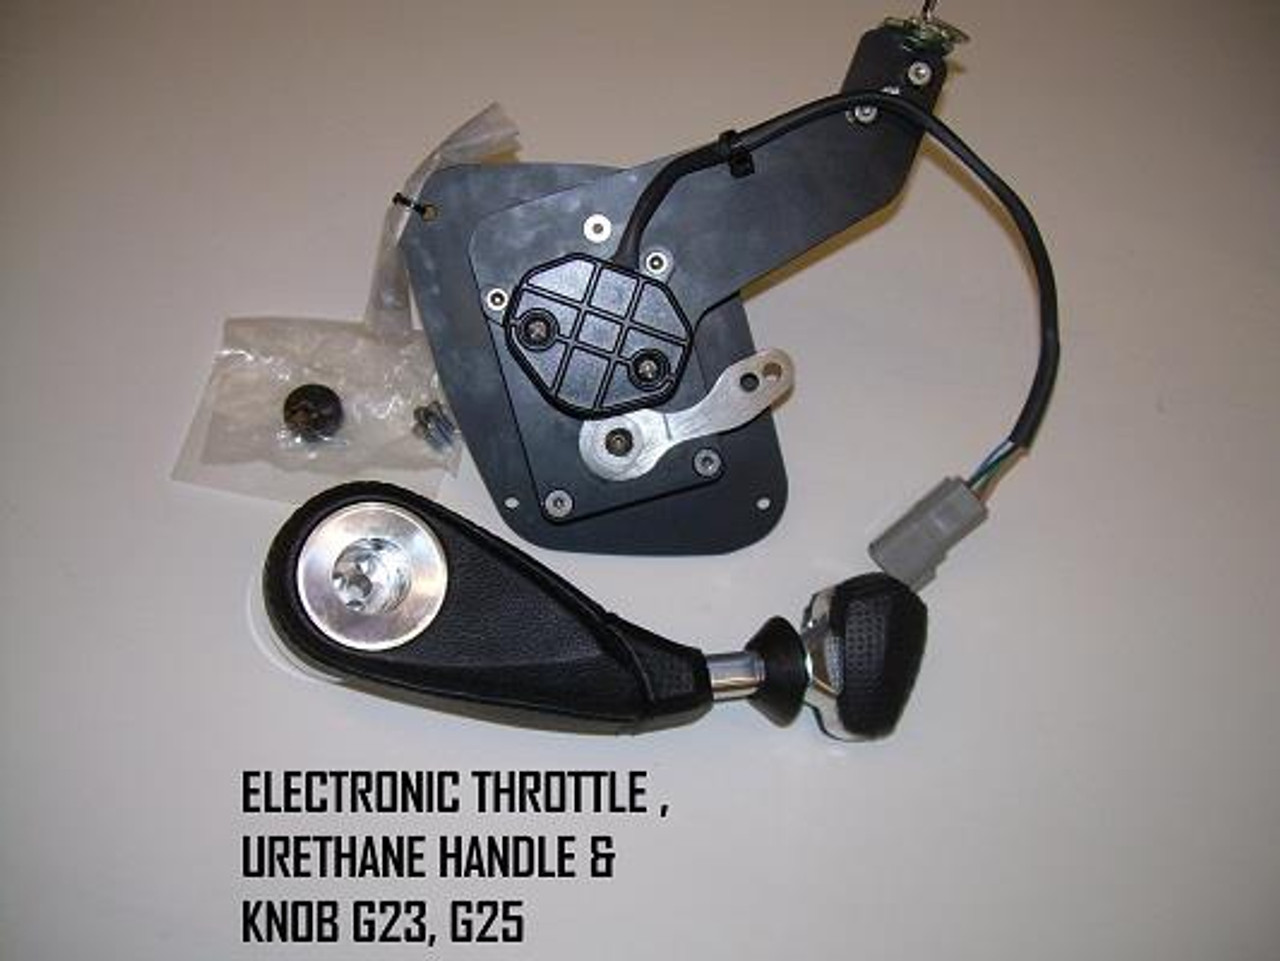 2013 -2014 G series ELECTRONIC THROTTLE ASSEMBLY WITH URETHANE HANDLE & KNOB